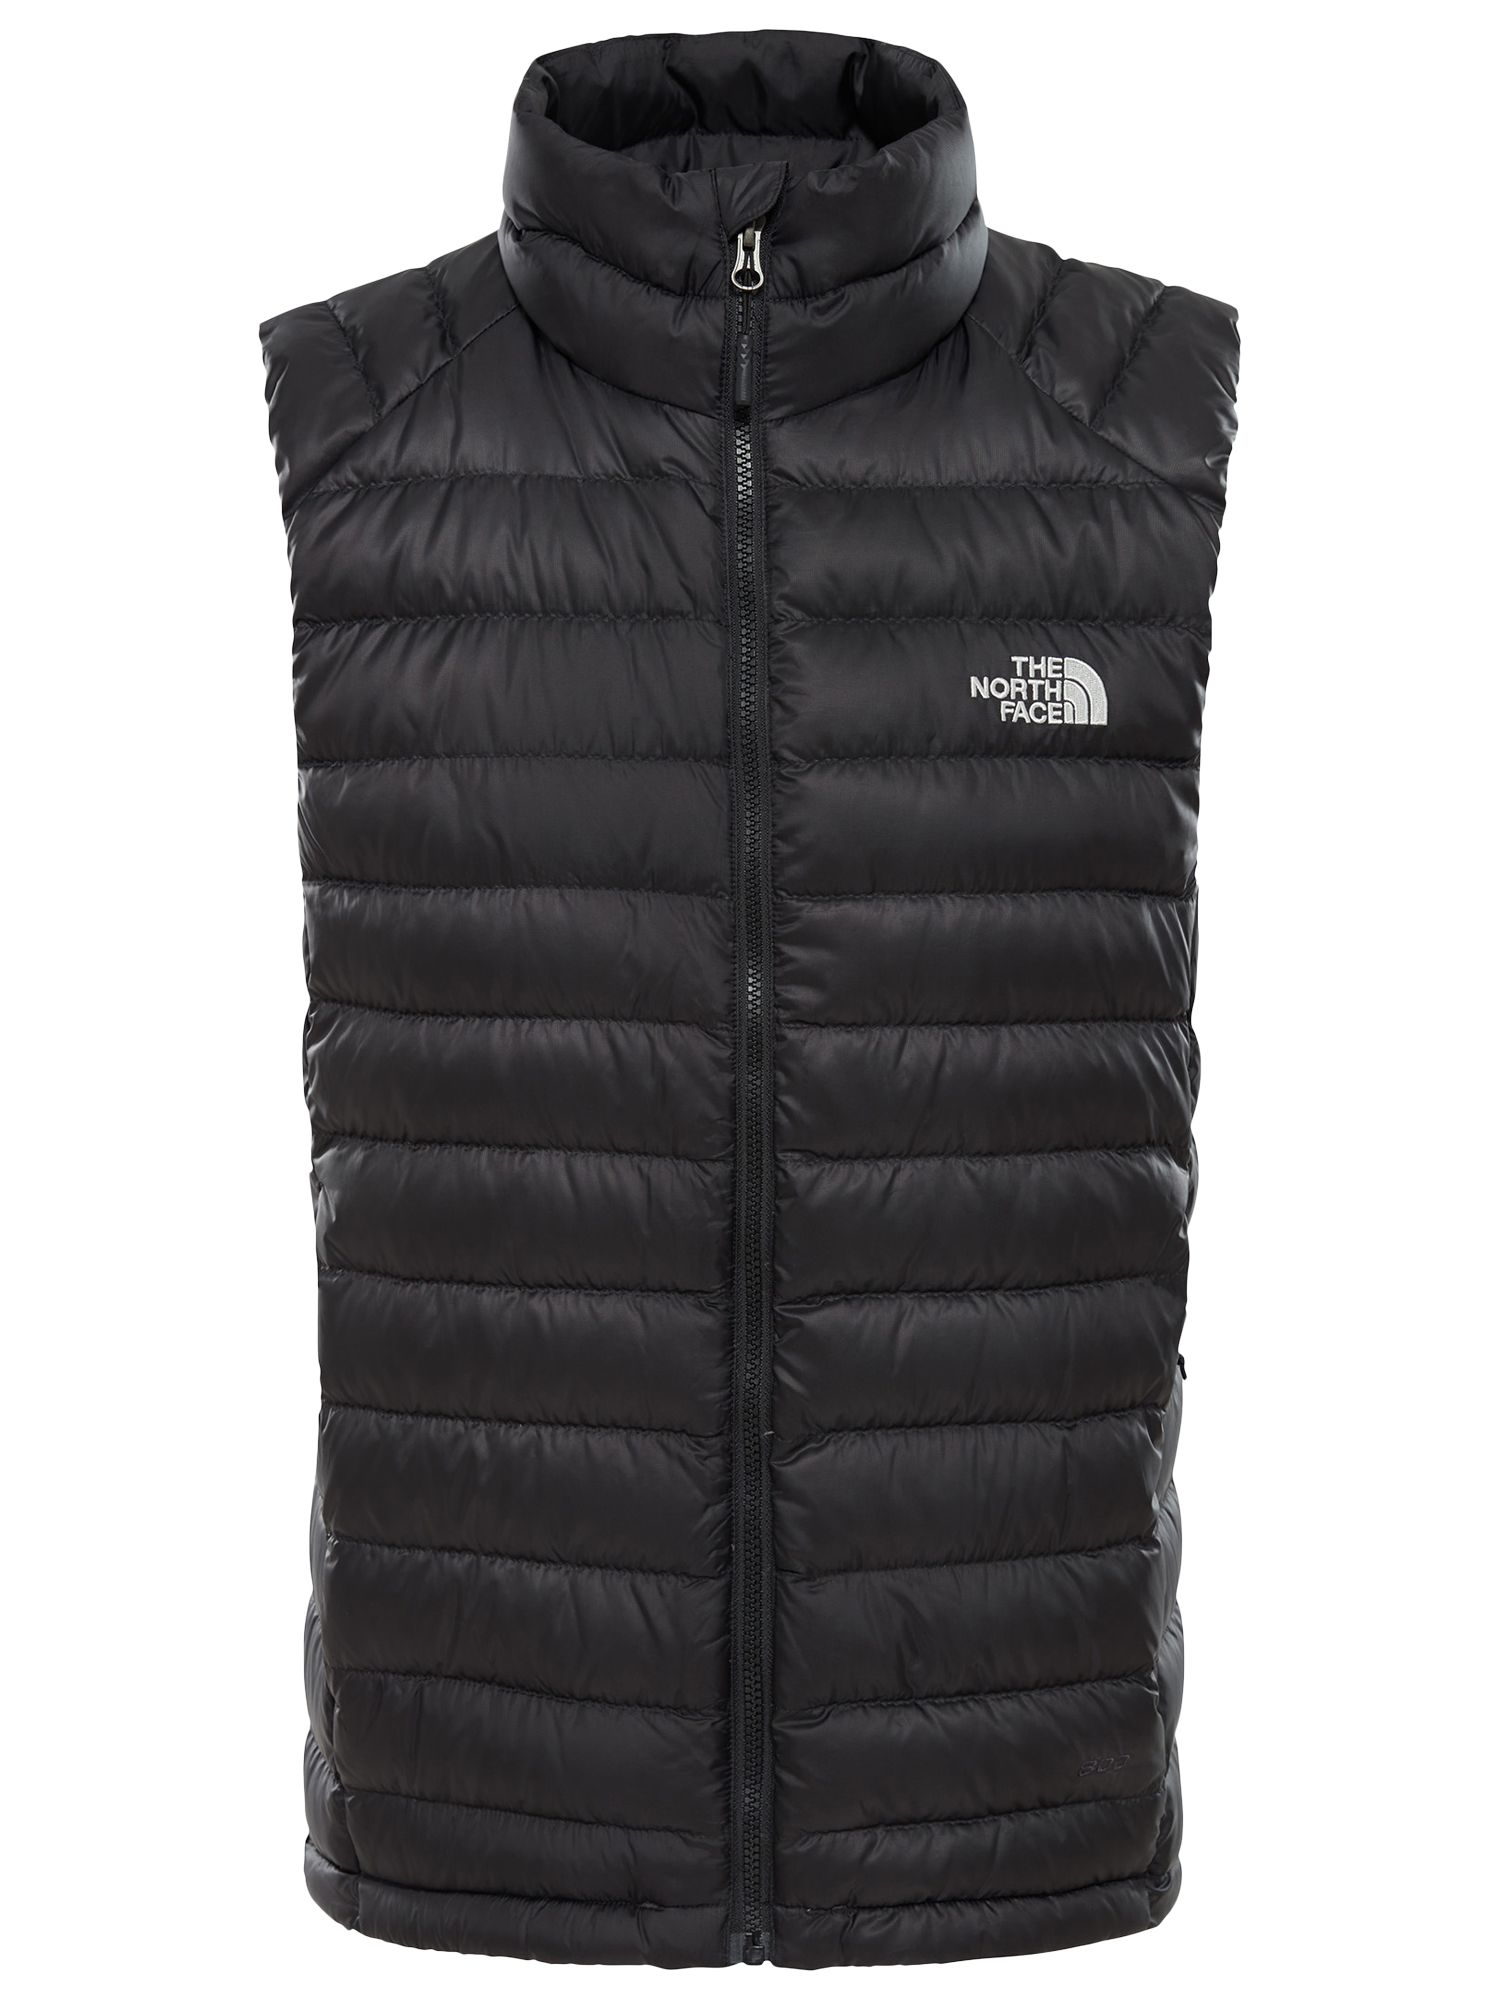 The North Face Trevail Gilet, Black at 